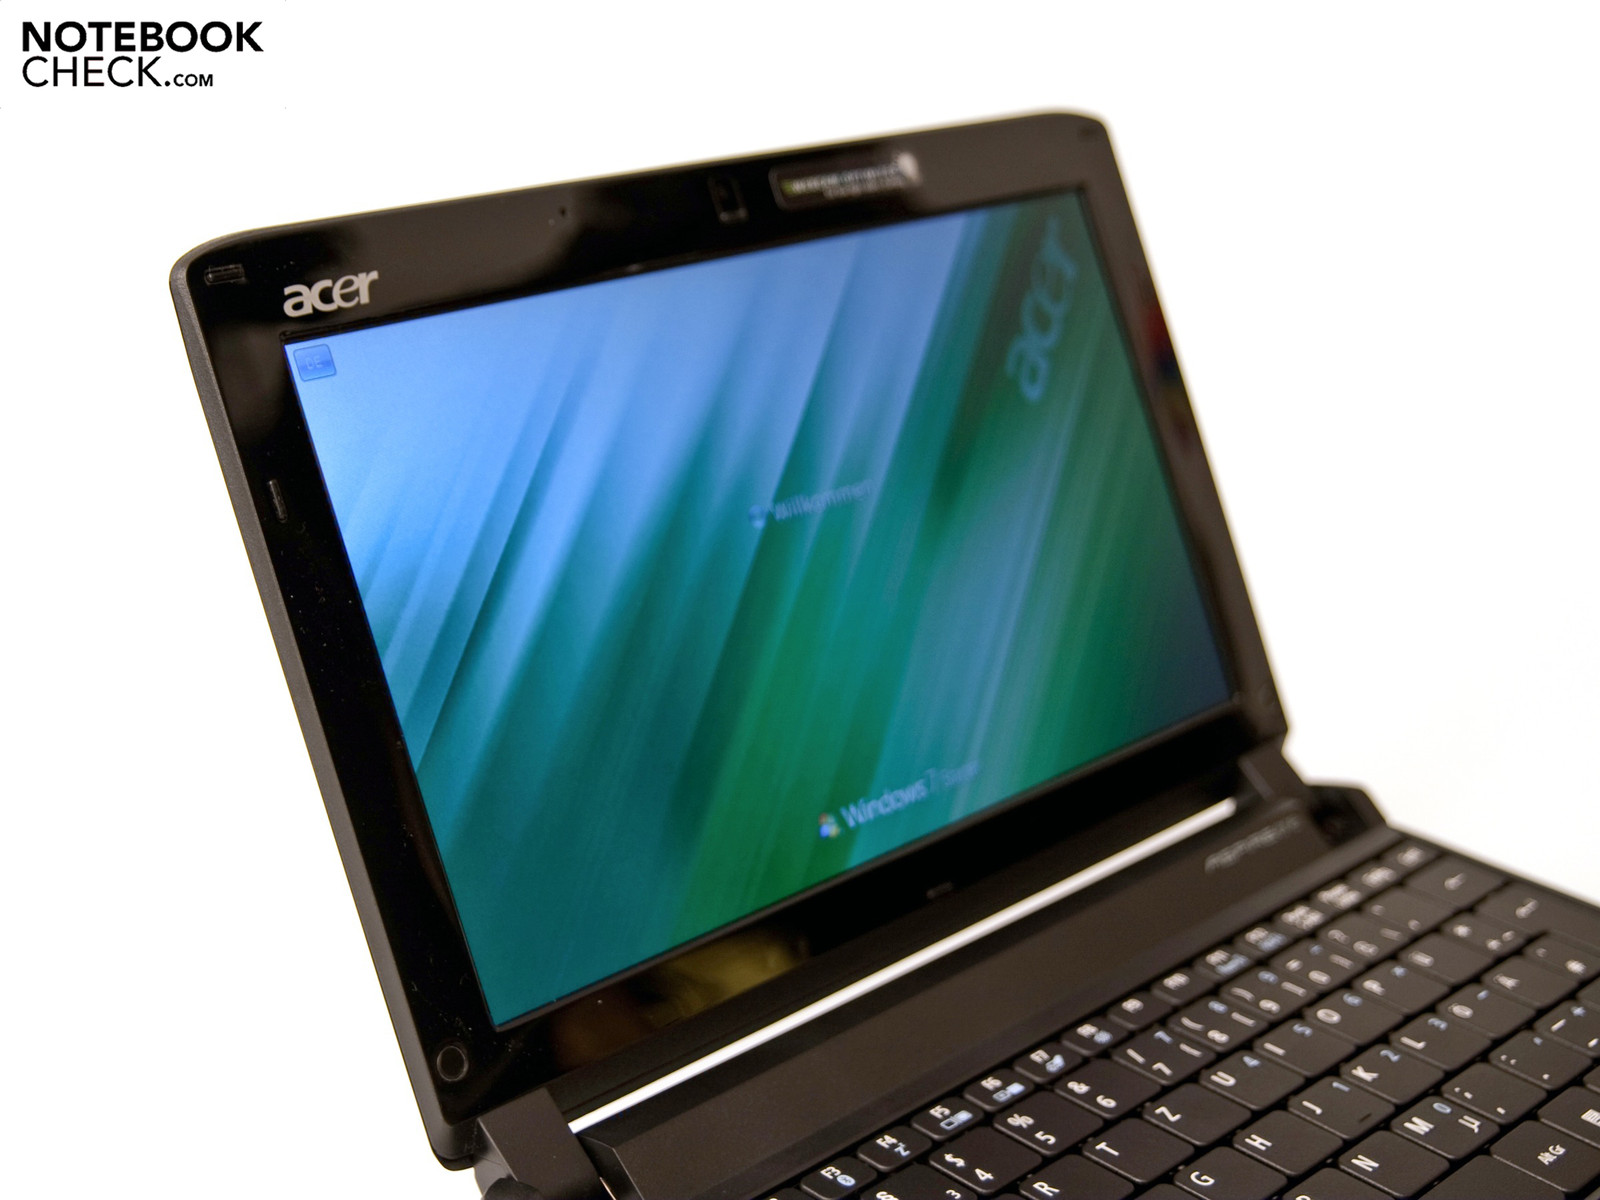 Acer Aspire one a532. Acer Aspire one 532g. Acer Aspire 532. Acer Aspire one 2013.